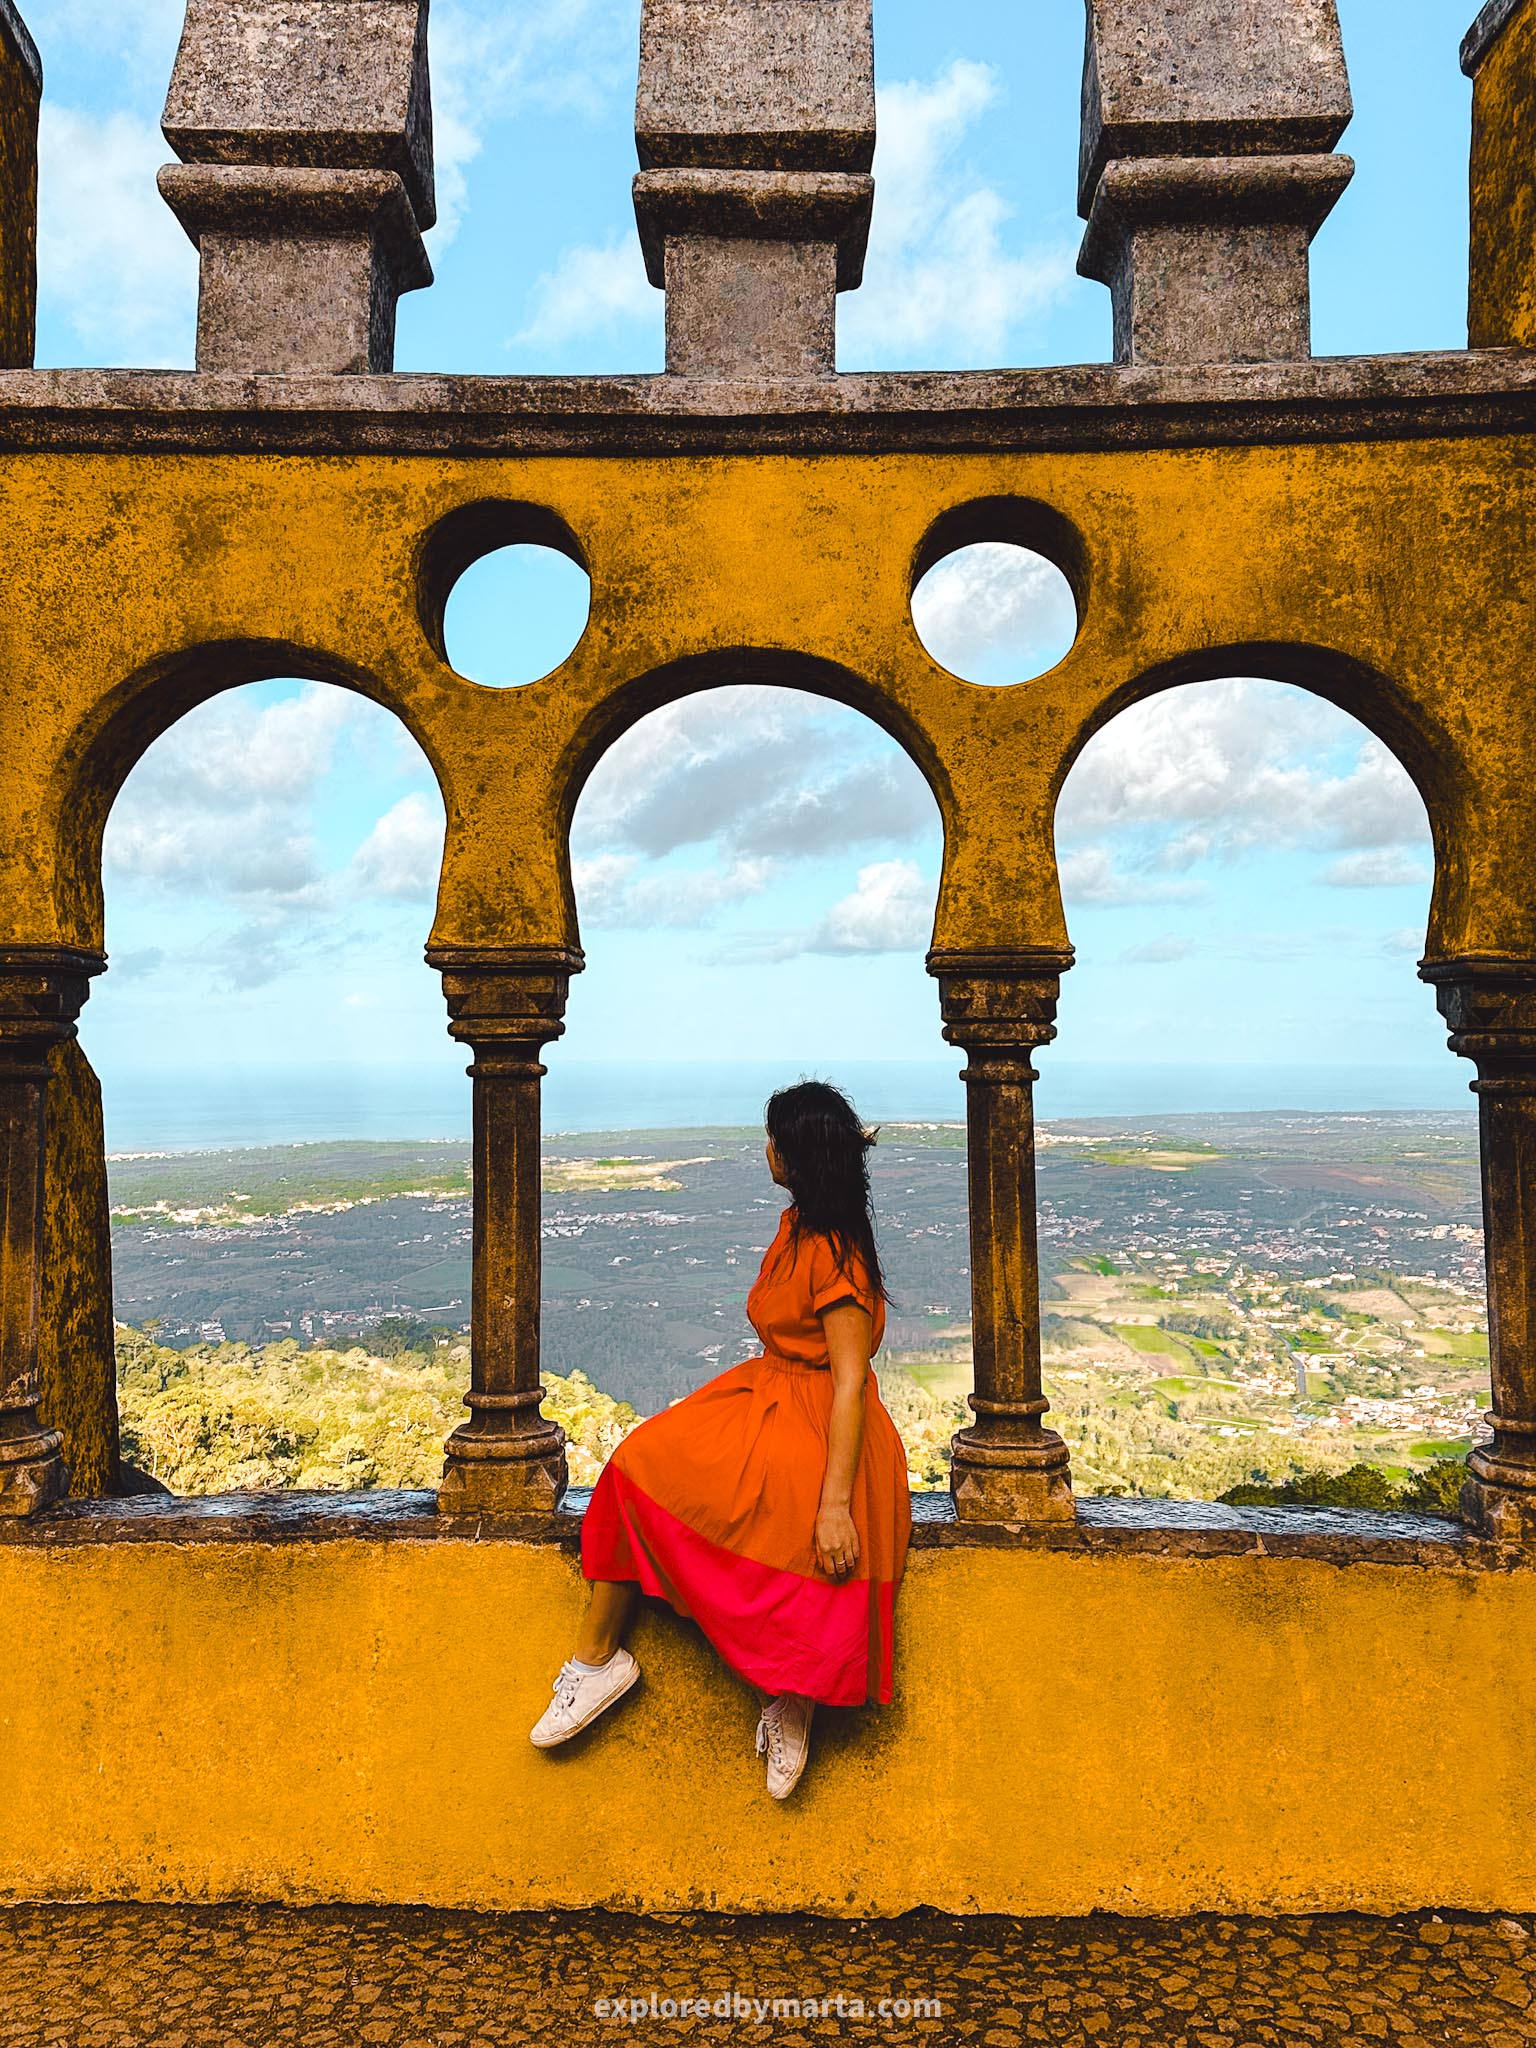 Instagram spots in Sintra, Portugal - yellow archways at the Palace of Pena